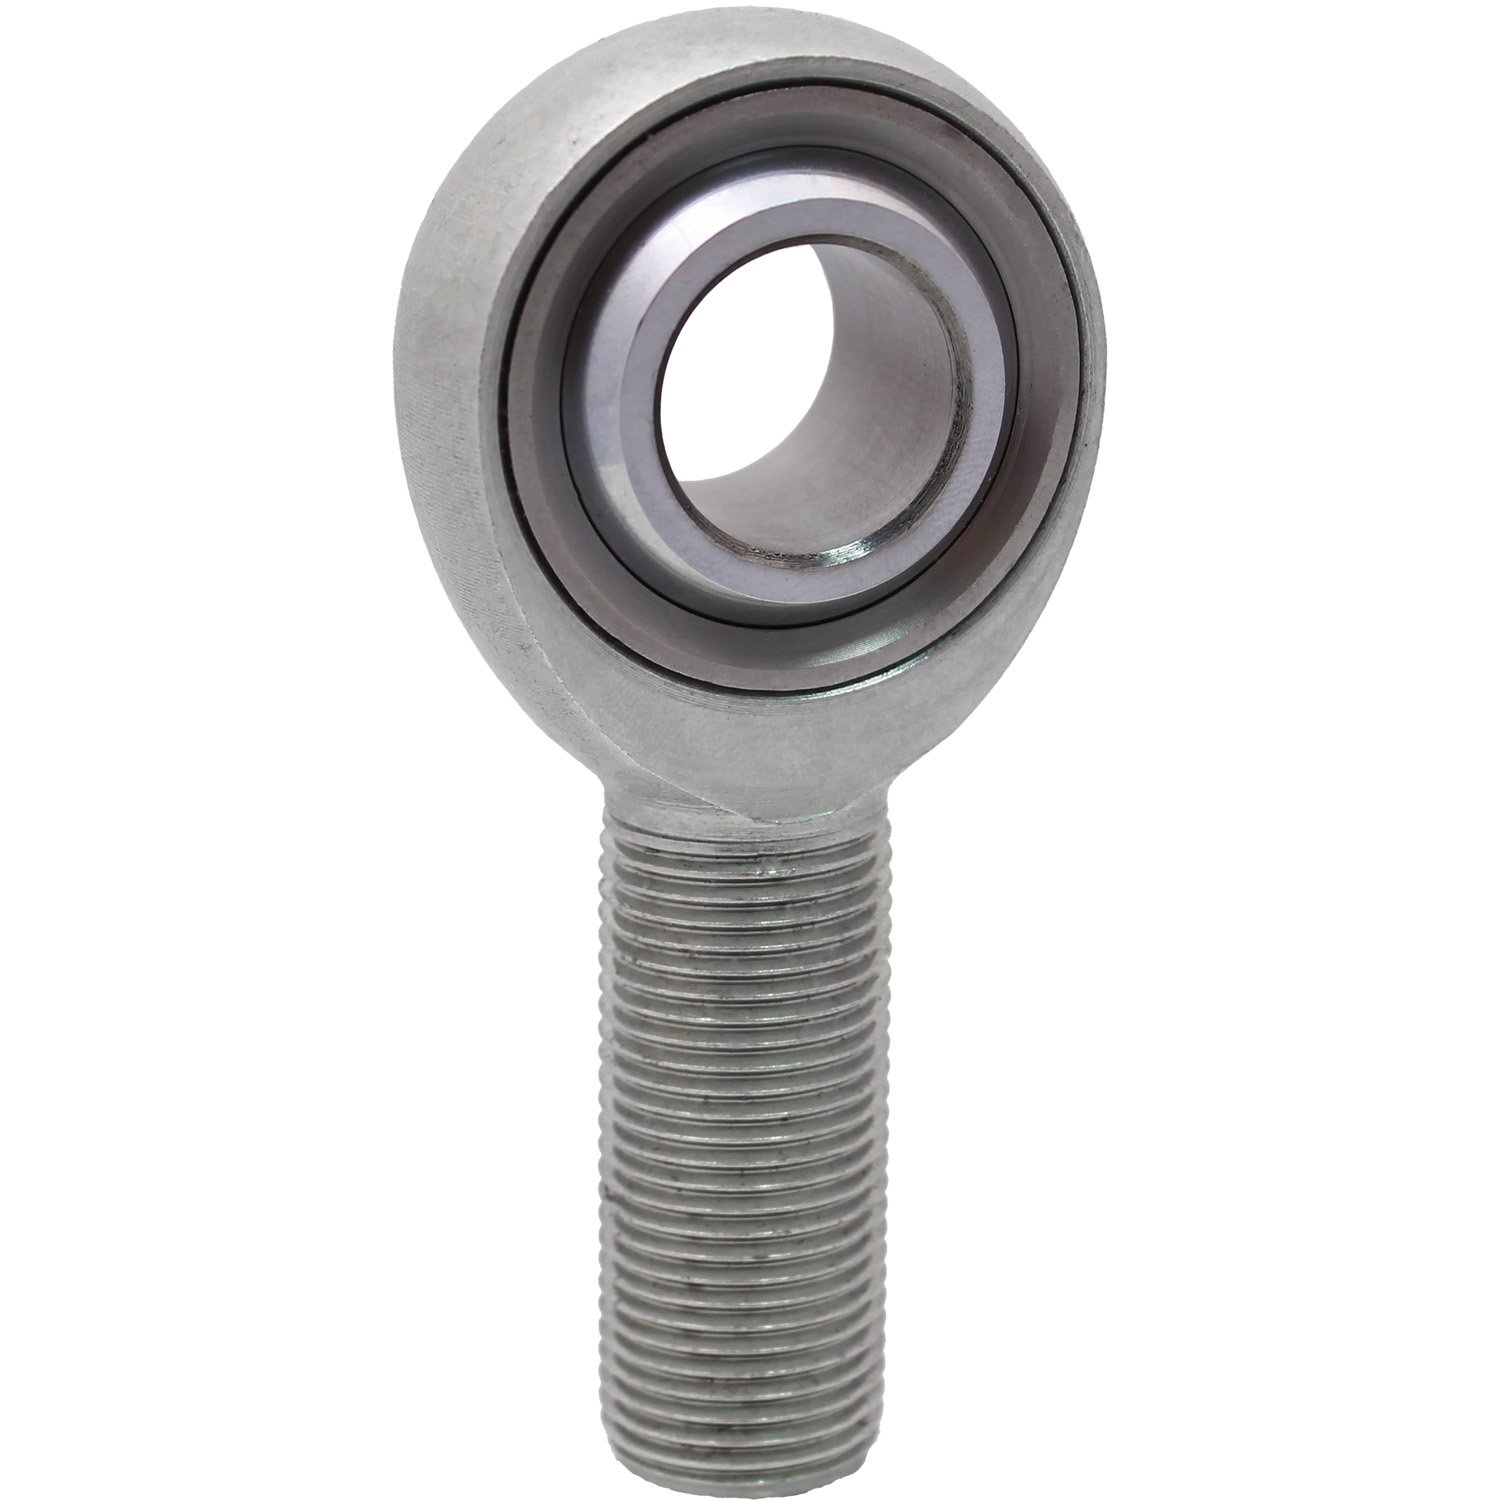 HM Series Rod End Hole I.D.: .3125 in.